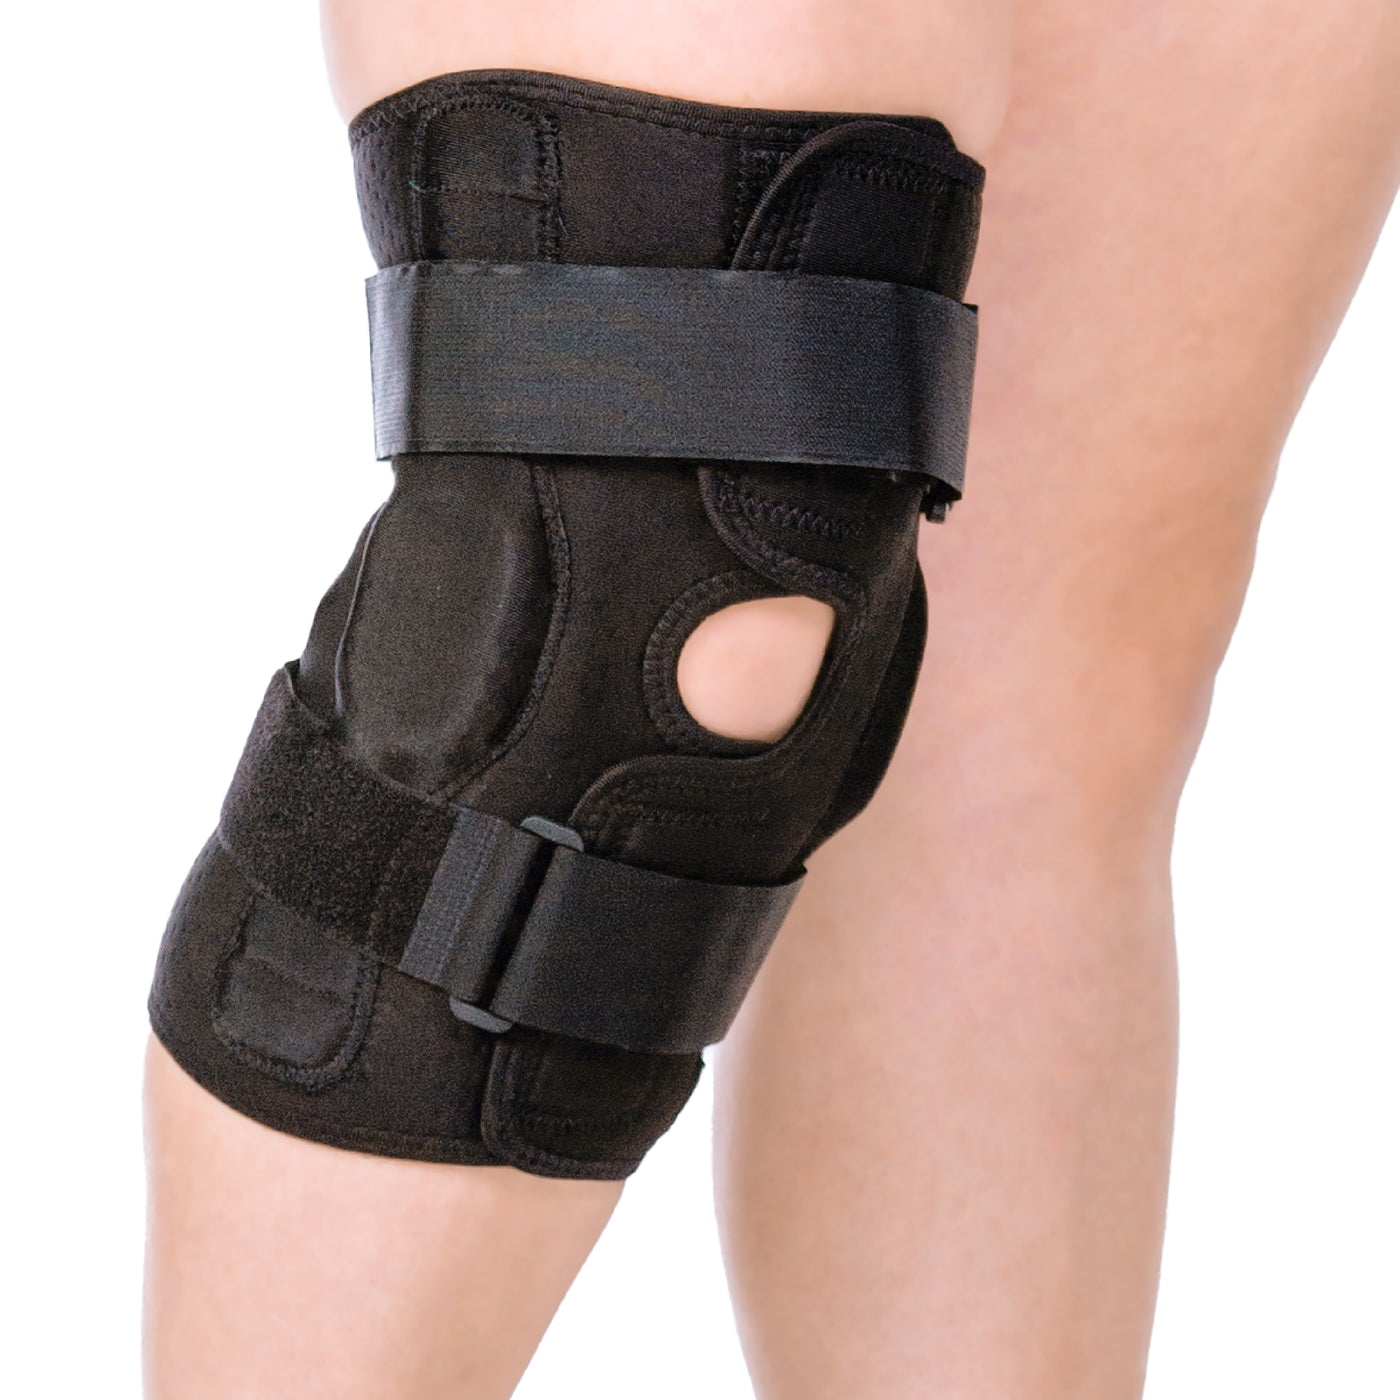 The Best Knee Braces For Torn ACL And Meniscus